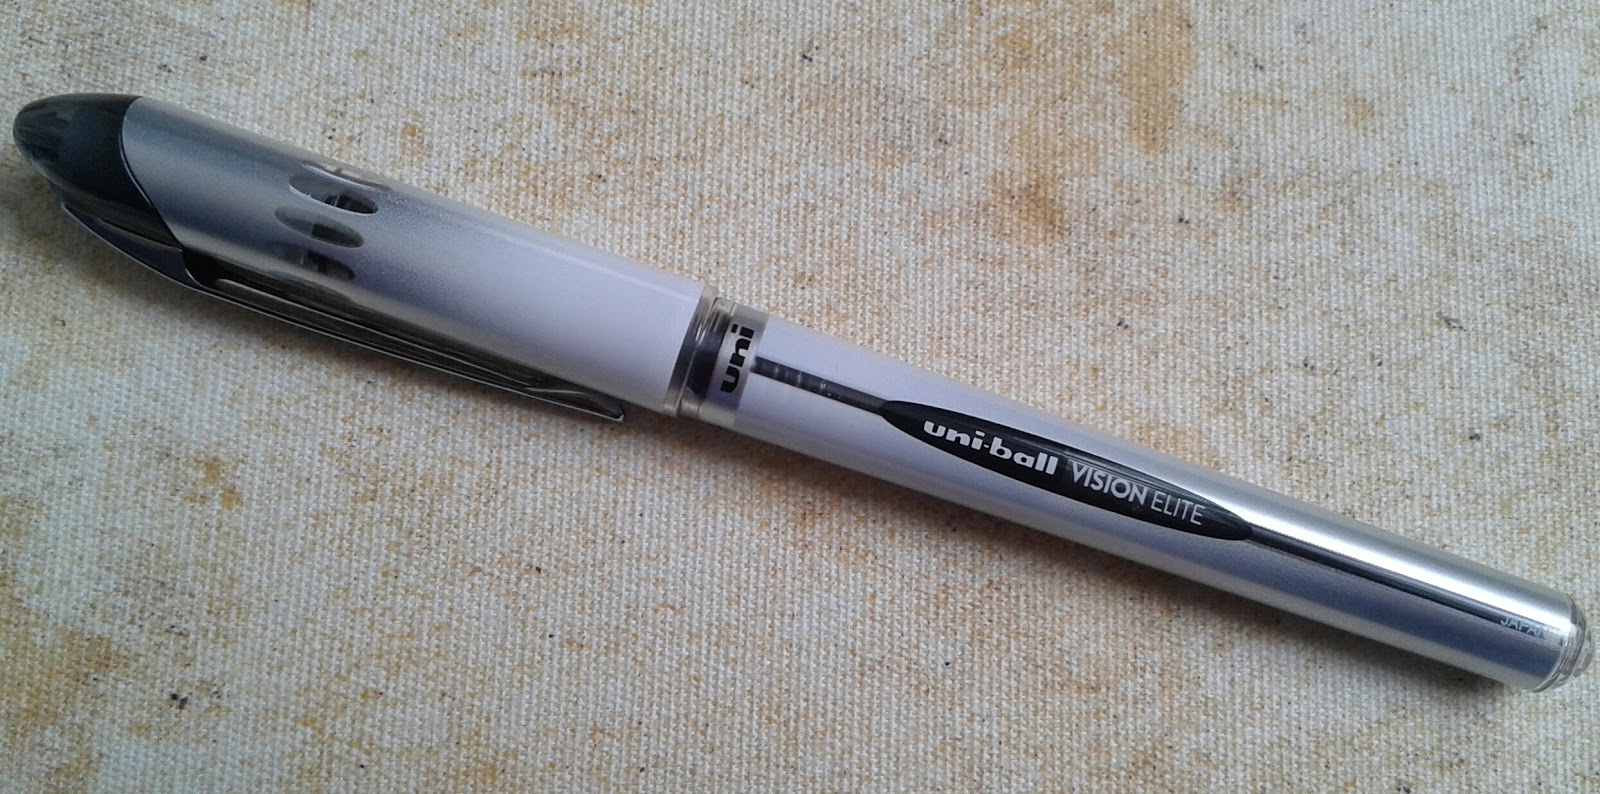 Pen Collection geekery: Uni-ball Vision Elite Liquid Ink Rollerball